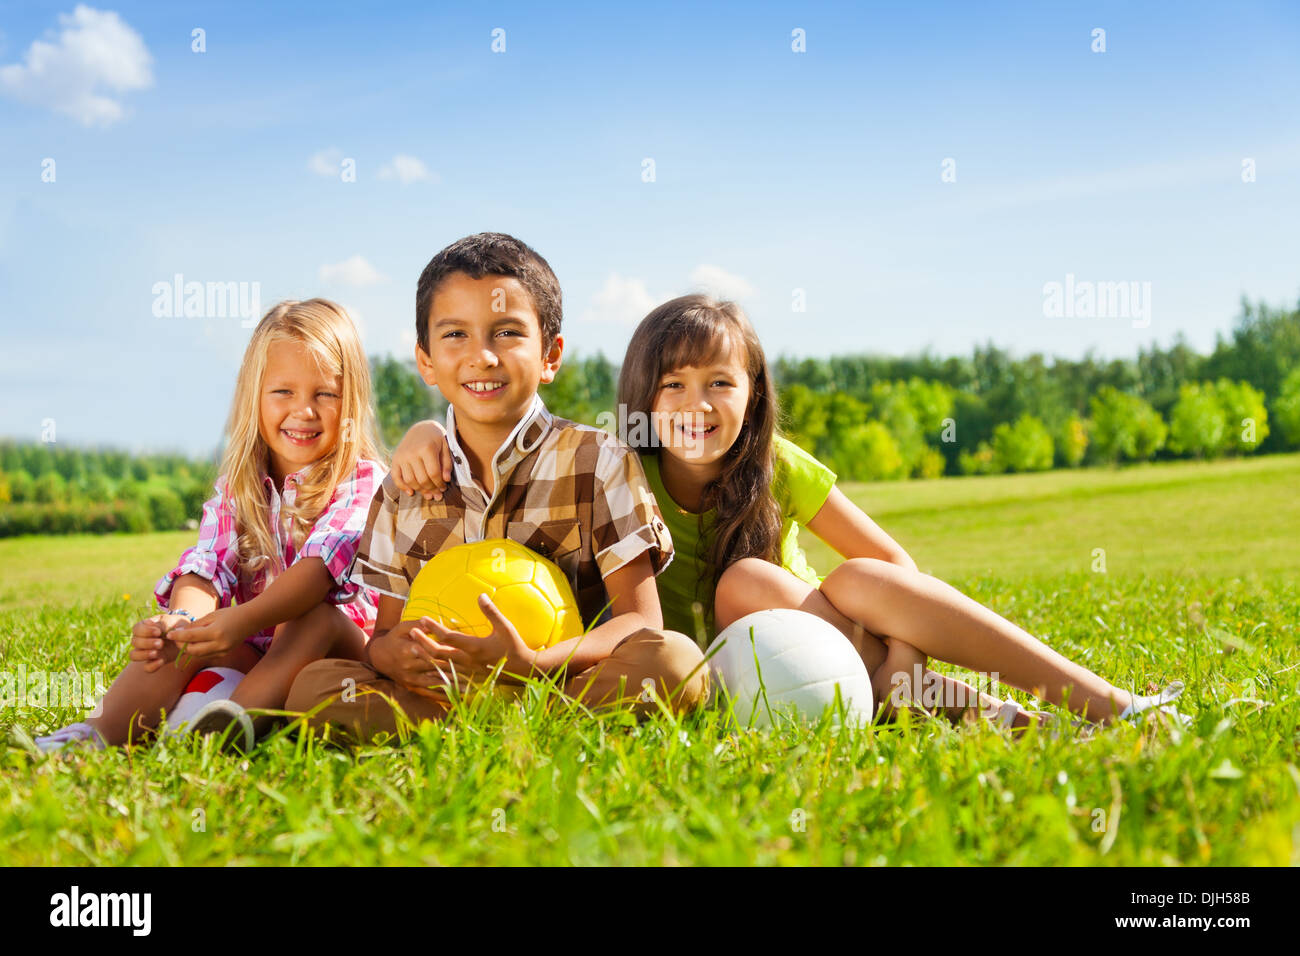 Portrait of three happy kids, boy and girls sitting in the sunny summer park holding sport balls Stock Photo